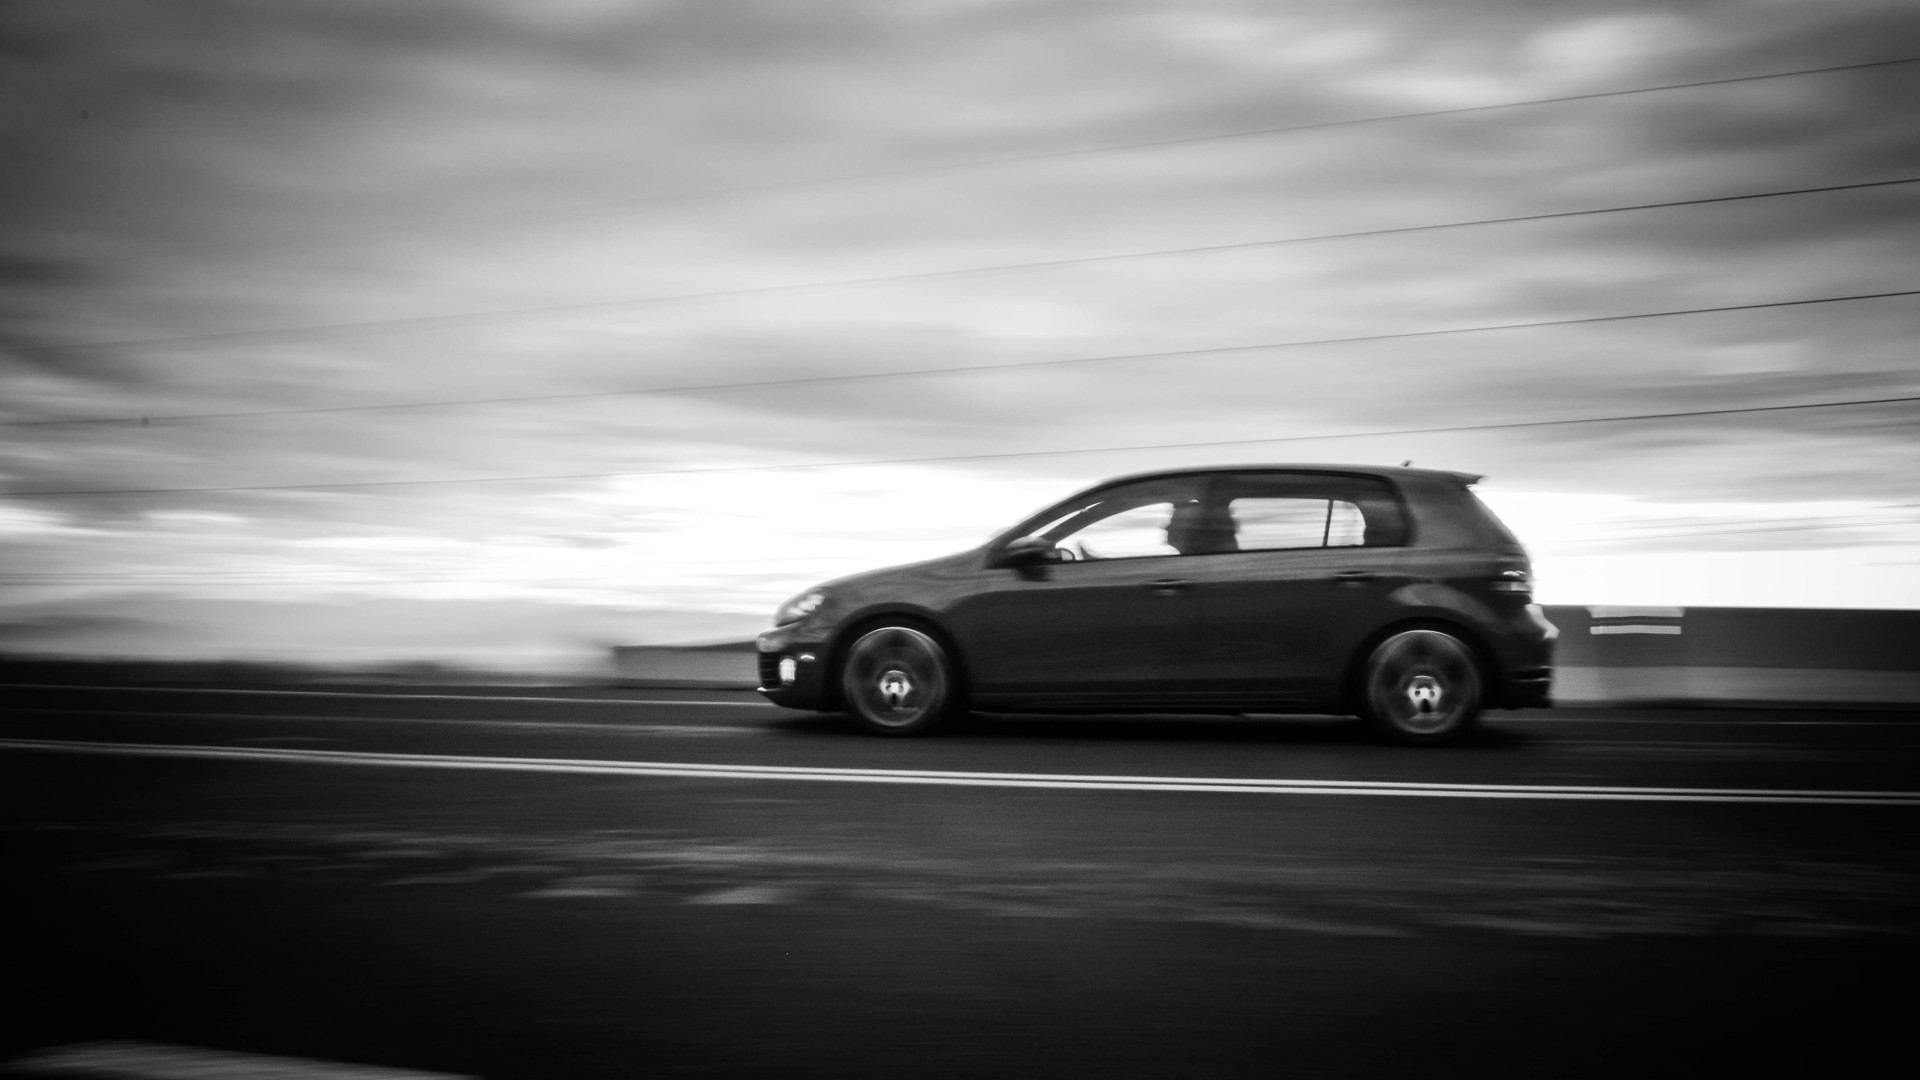 1920x1080 Some more hi-res wallpaper goodness. Rolling BW shot of a MKVI GTI.